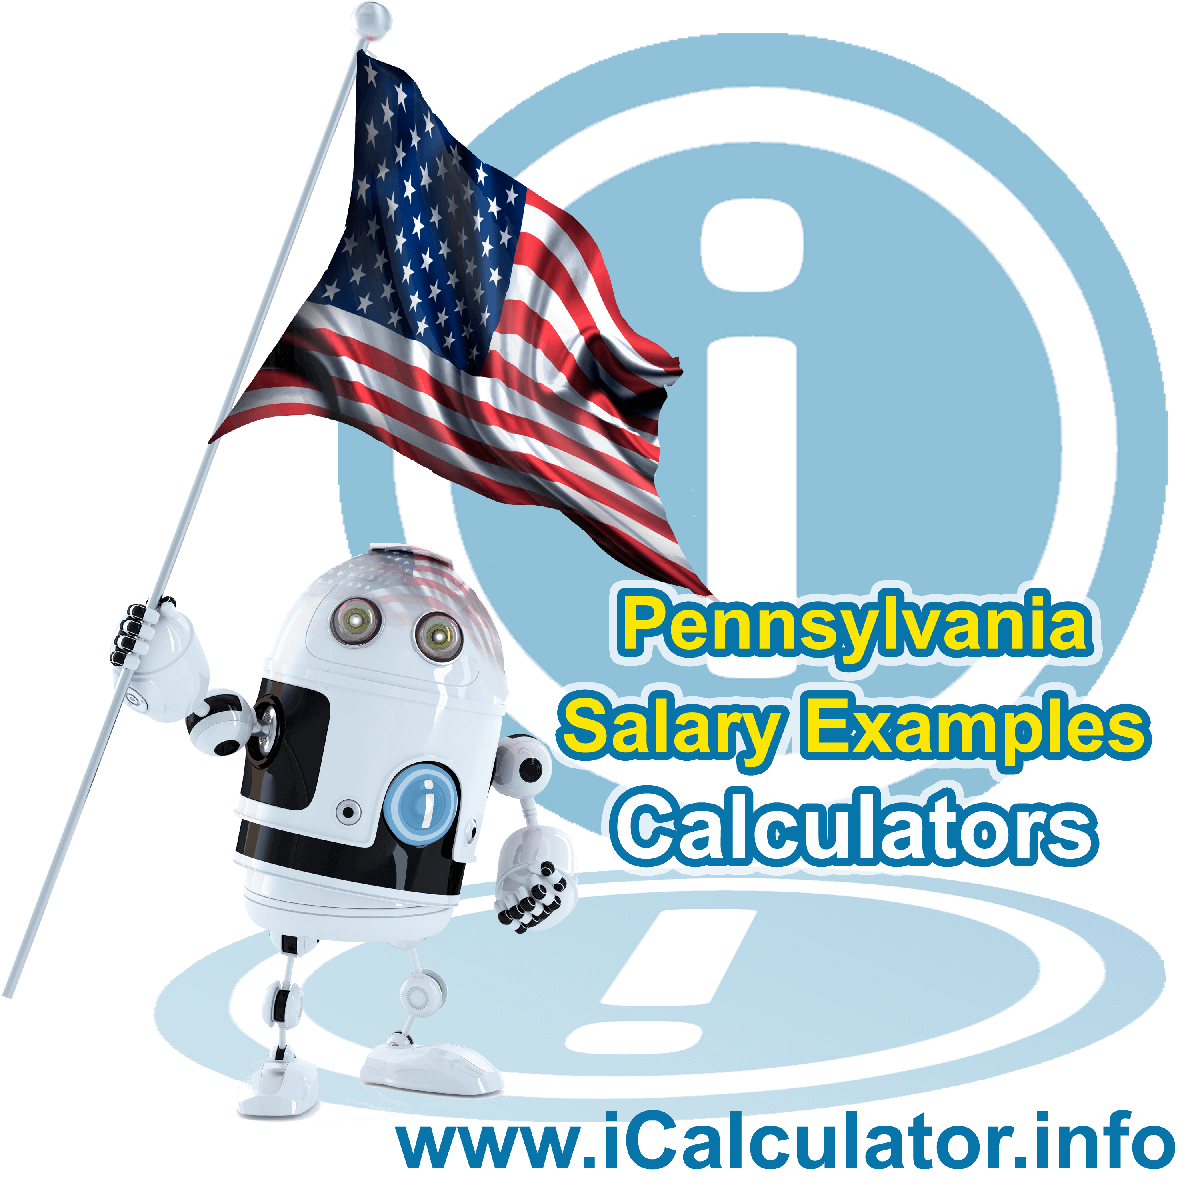 Pennsylvania Salary Example for $ 50,000.00 in 2023 | iCalculator™ | $ 50,000.00 salary example for employee and employer paying Pennsylvania State tincome taxes. Detailed salary after tax calculation including Pennsylvania State Tax, Federal State Tax, Medicare Deductions, Social Security, Capital Gains and other income tax and salary deductions complete with supporting Pennsylvania state tax tables 